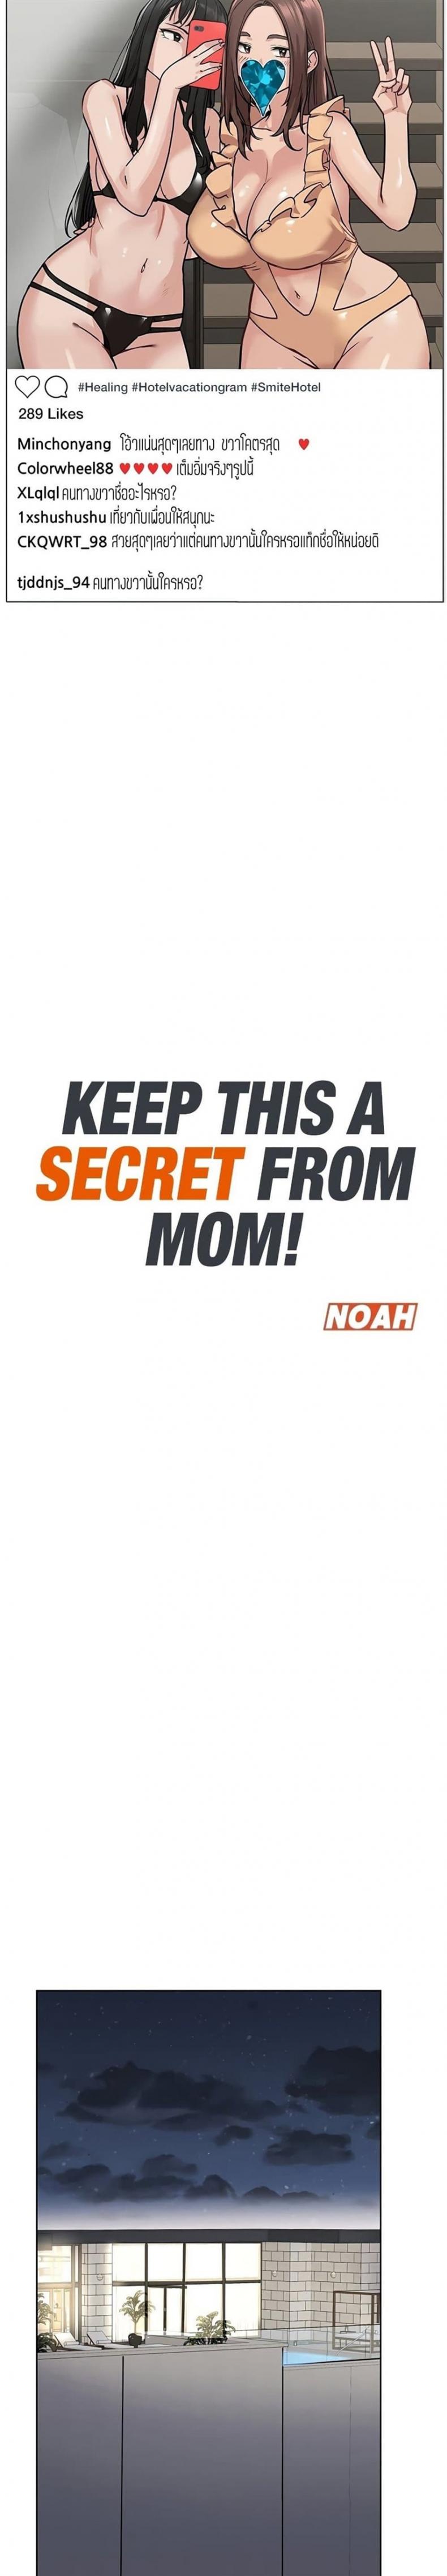 Keep it A Secret from Your Mother! 42 ภาพที่ 4